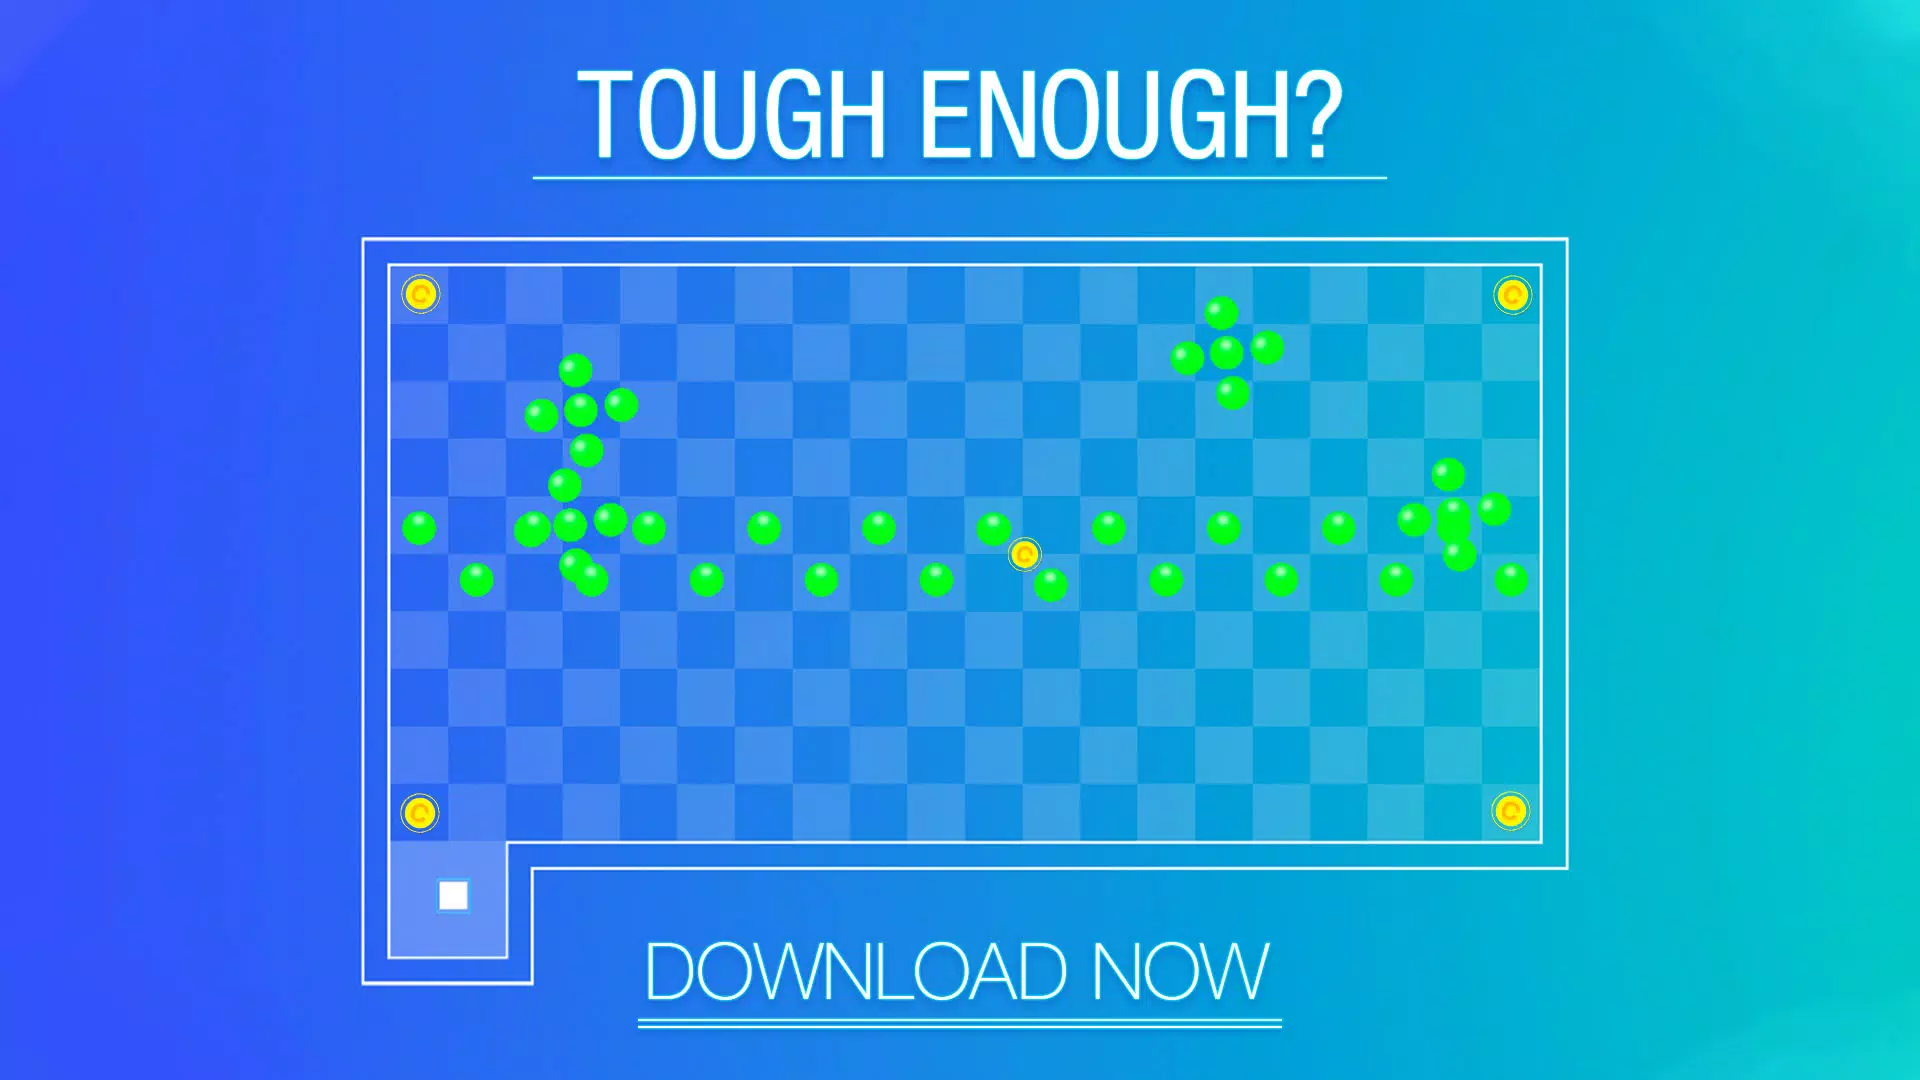 Worlds Hardest Game::Appstore for Android